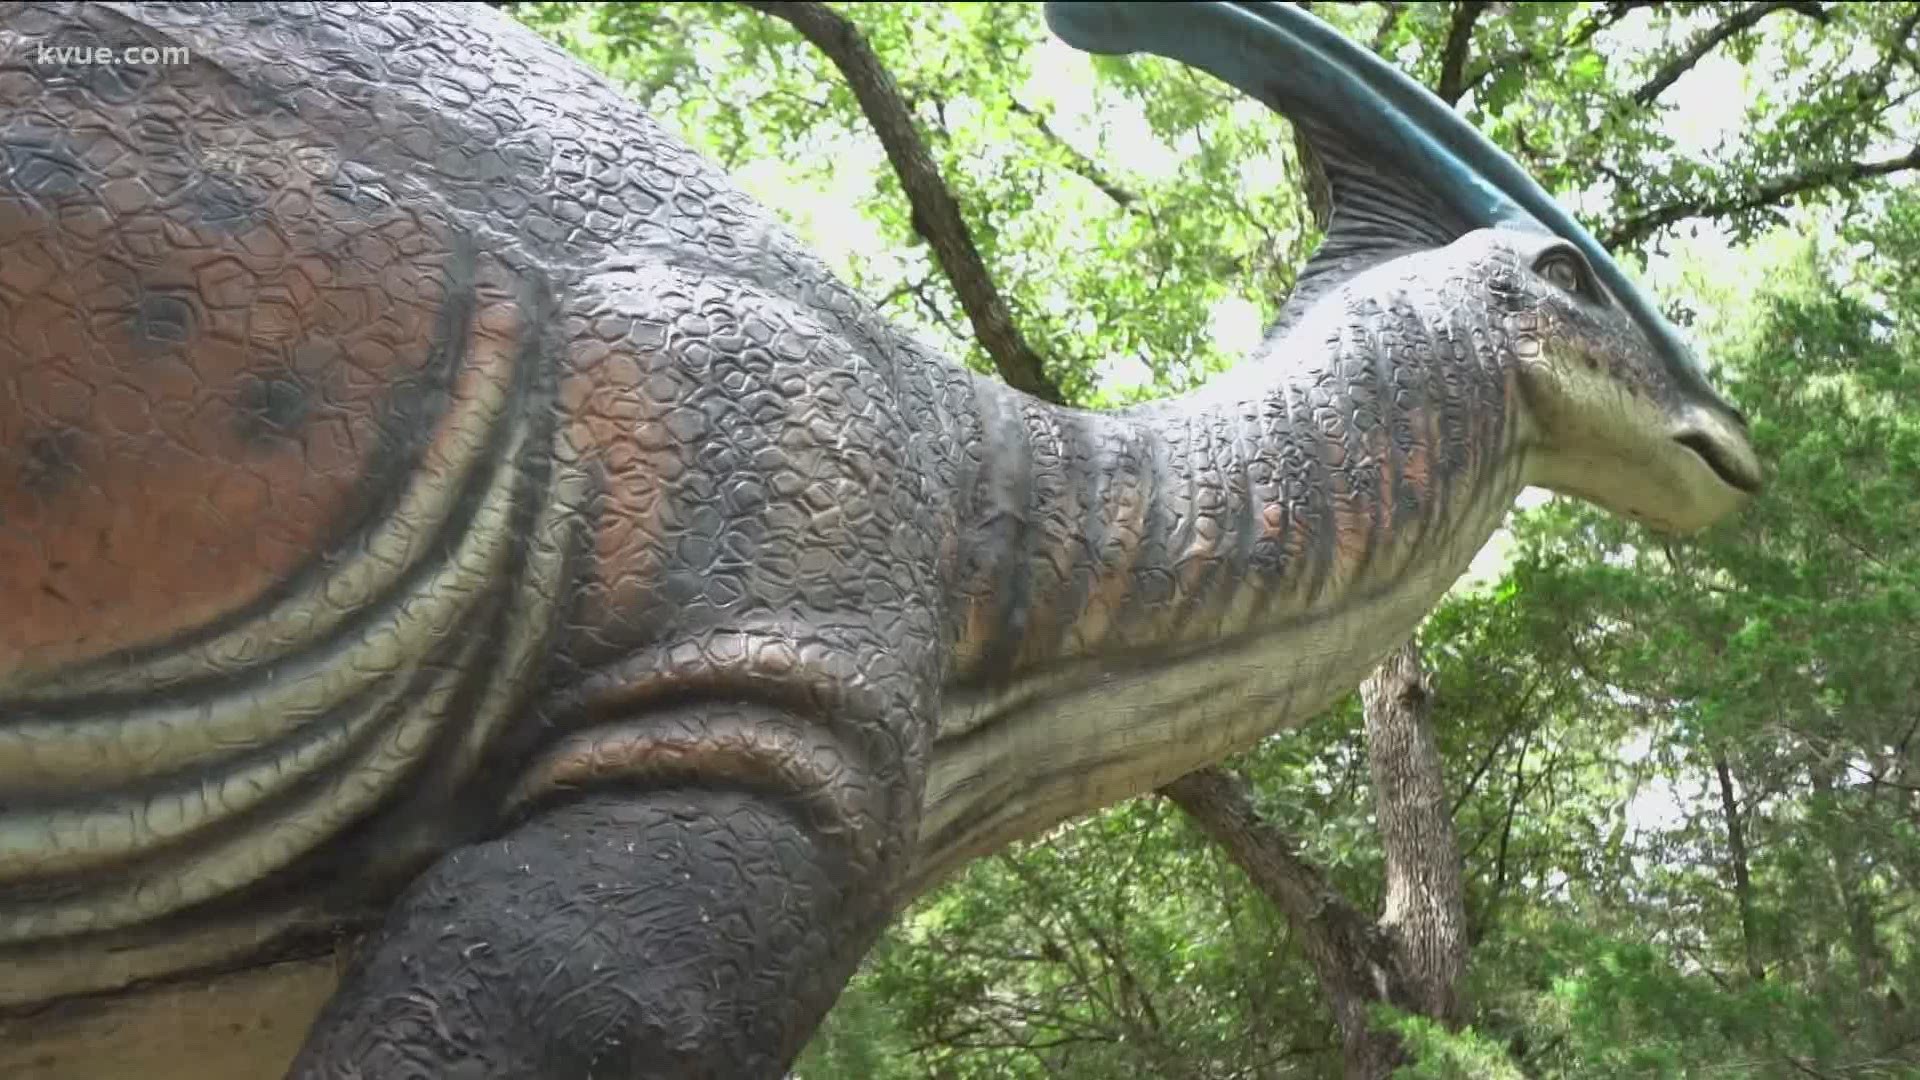 KVUE meteorologists Shane Hinton and Hunter Williams are heading outside to explore everything Central Texas has to offer. This week, they visited The Dinosaur Park.